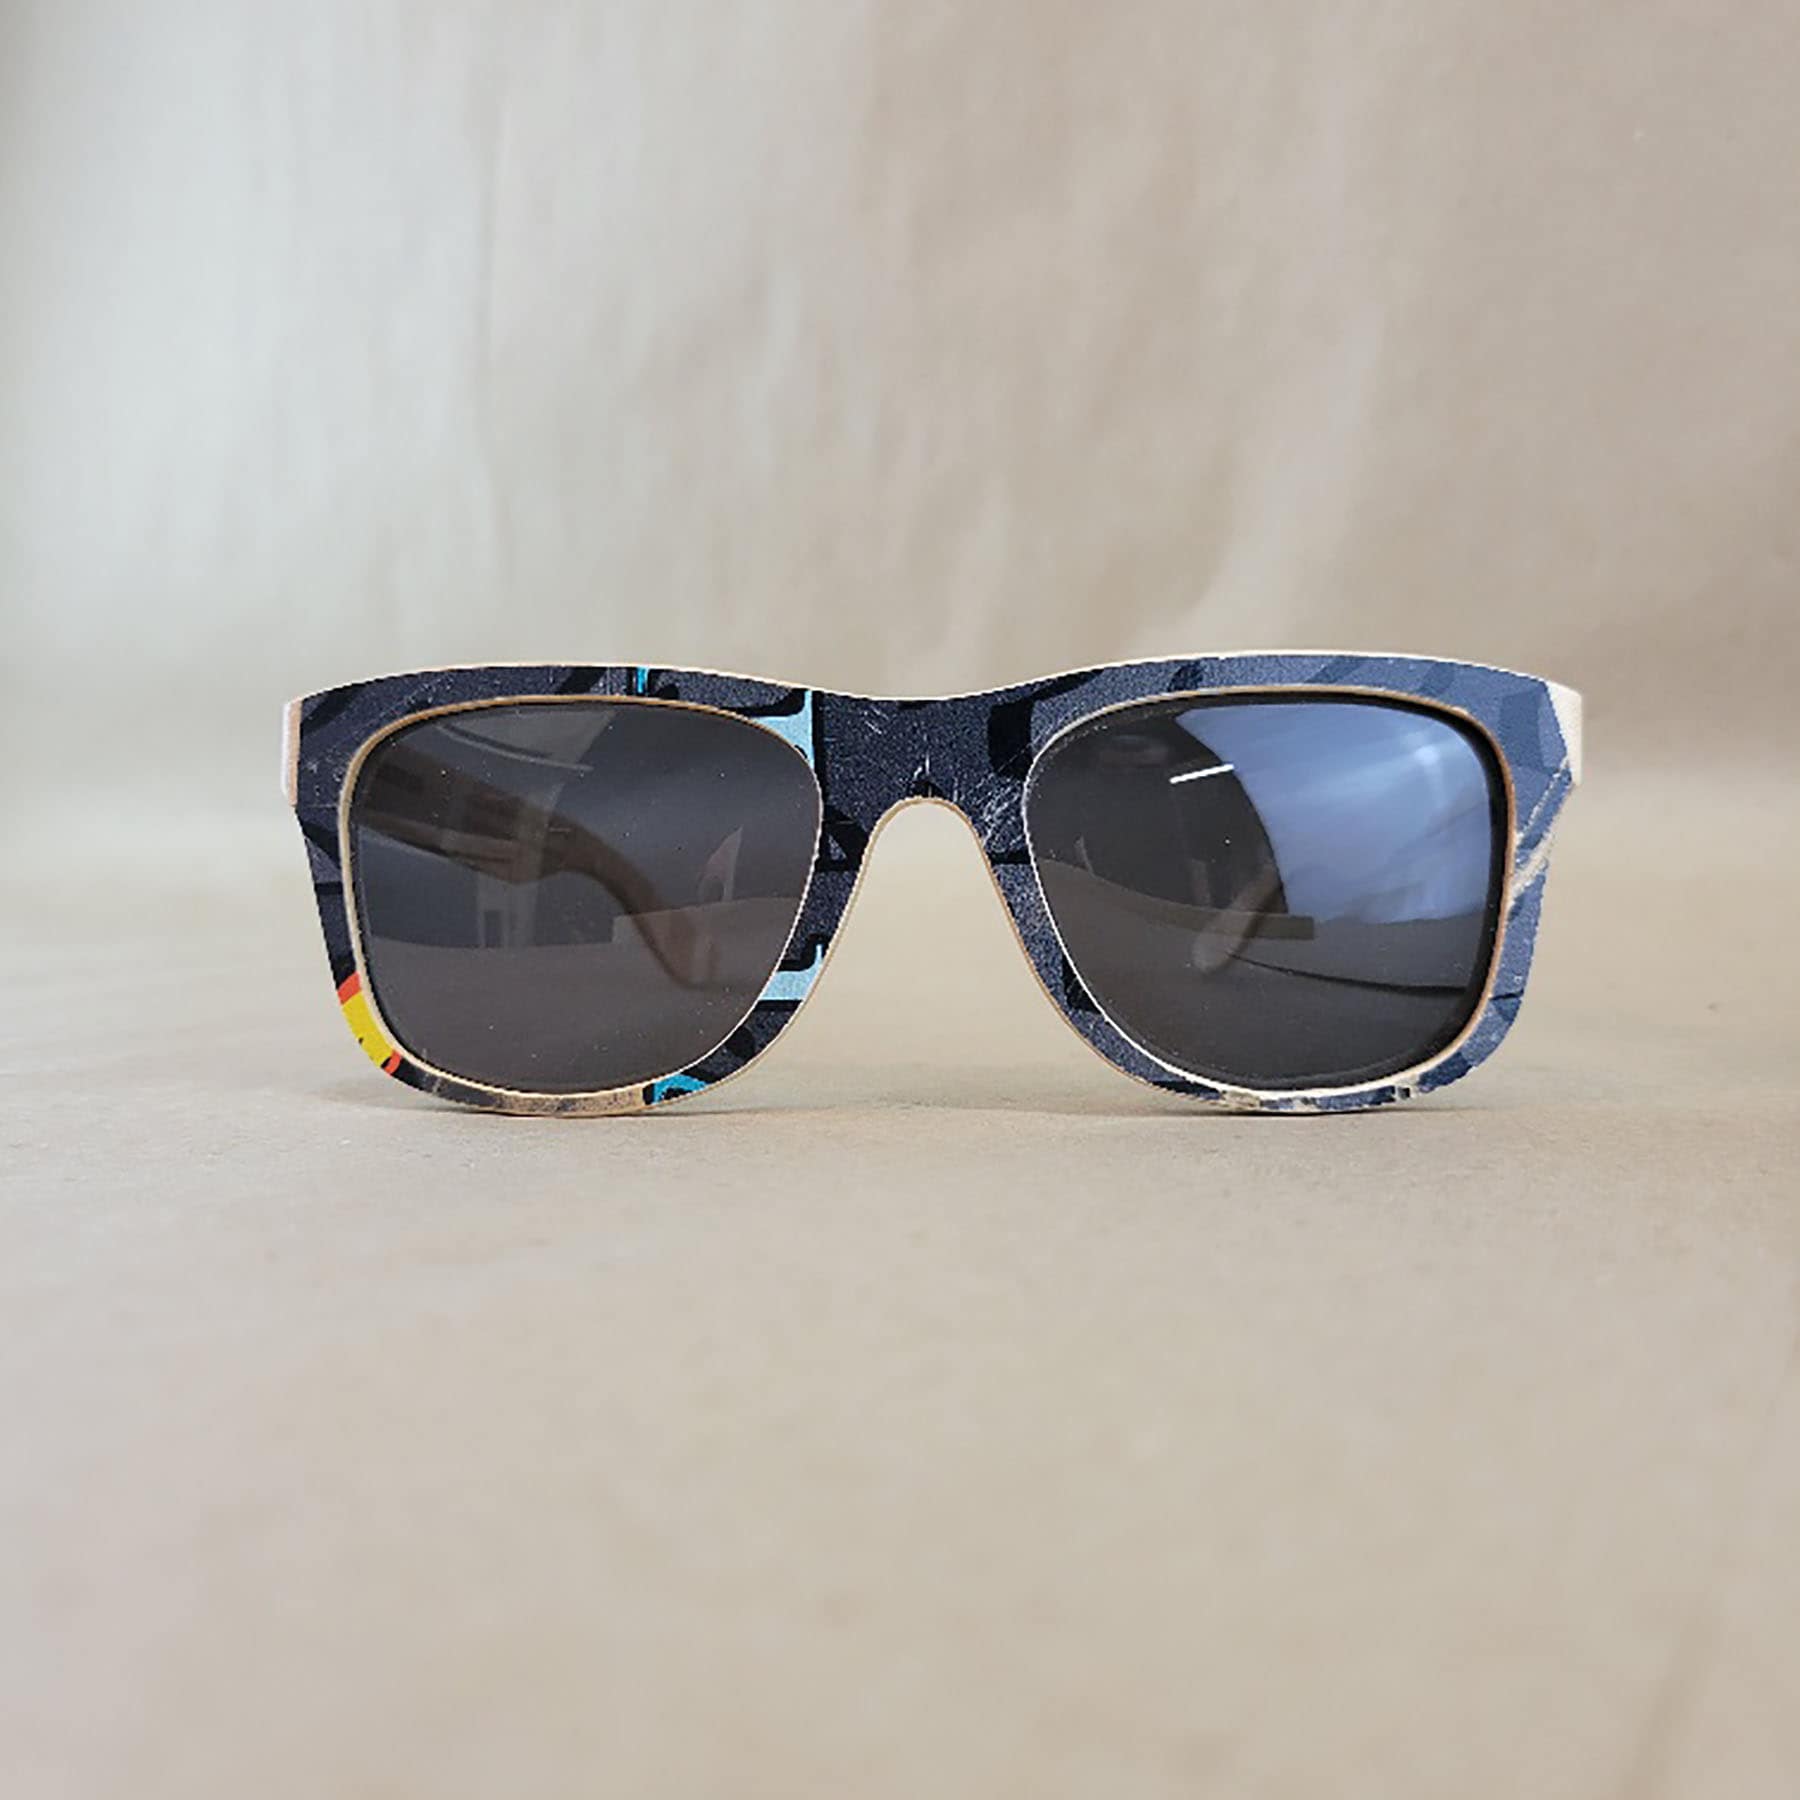 Kilian Martin Collection #4 – 5 of 6 Recycled Skateboard Sunglasses